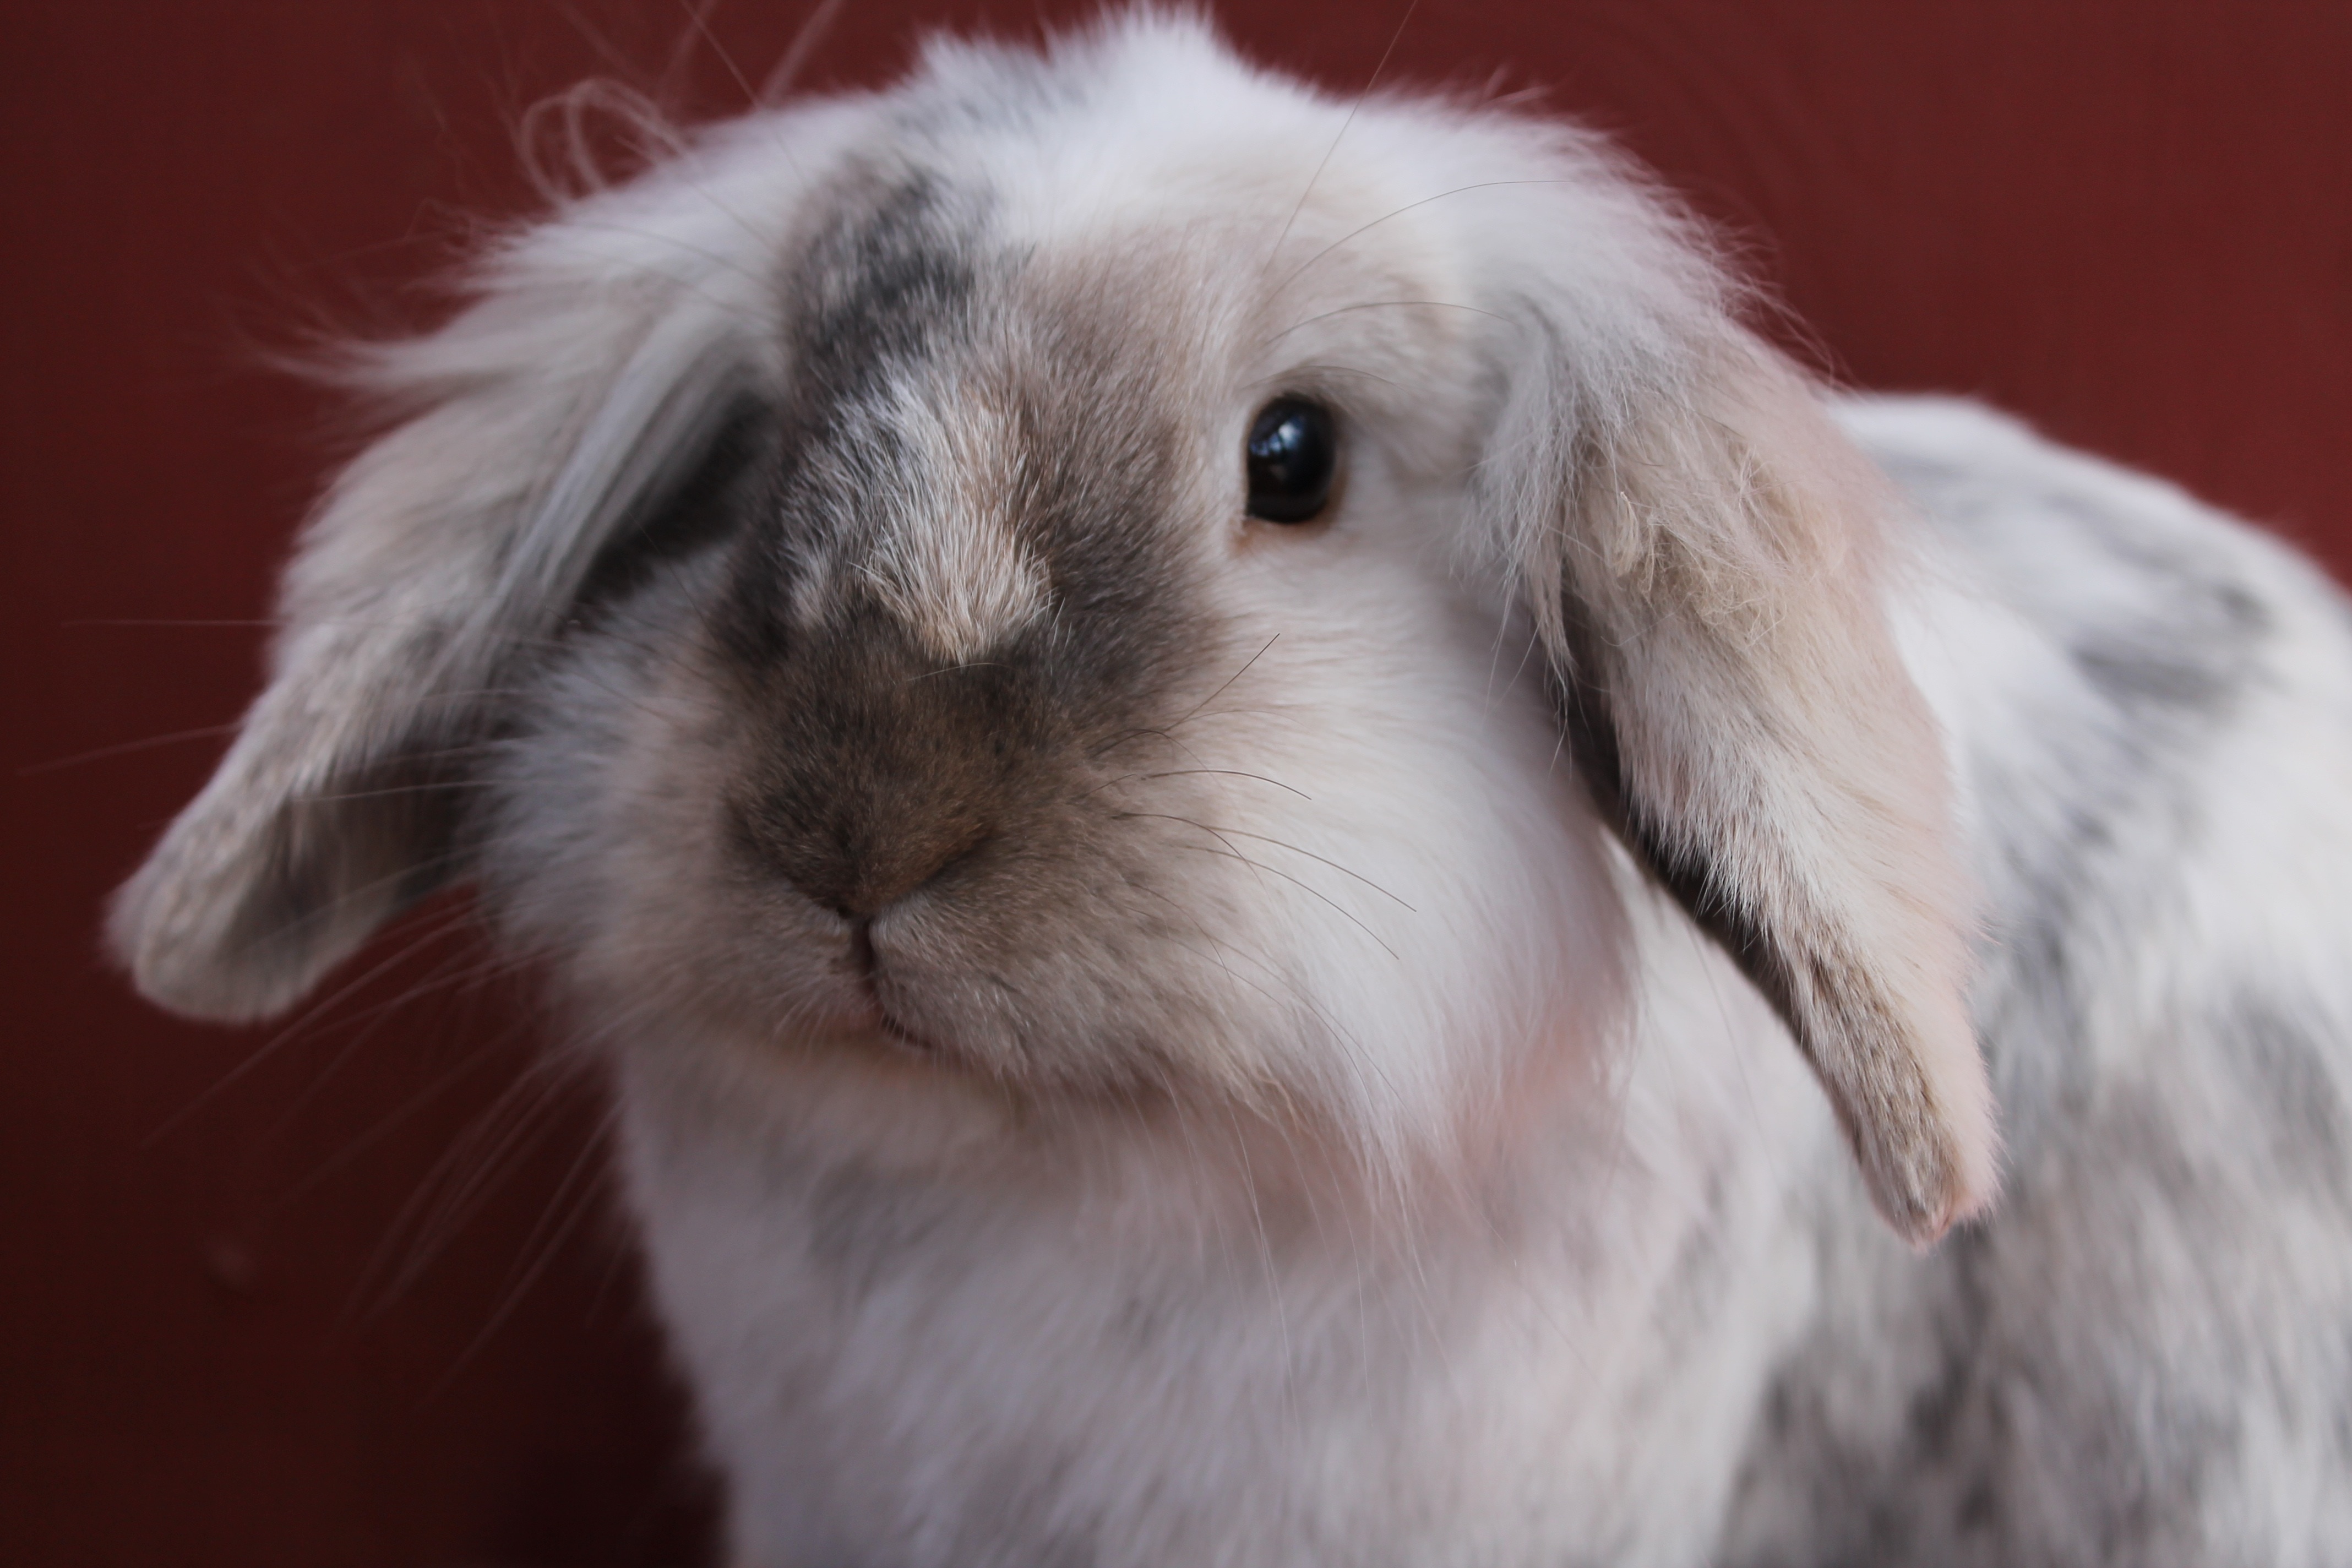 white and brown rabbit